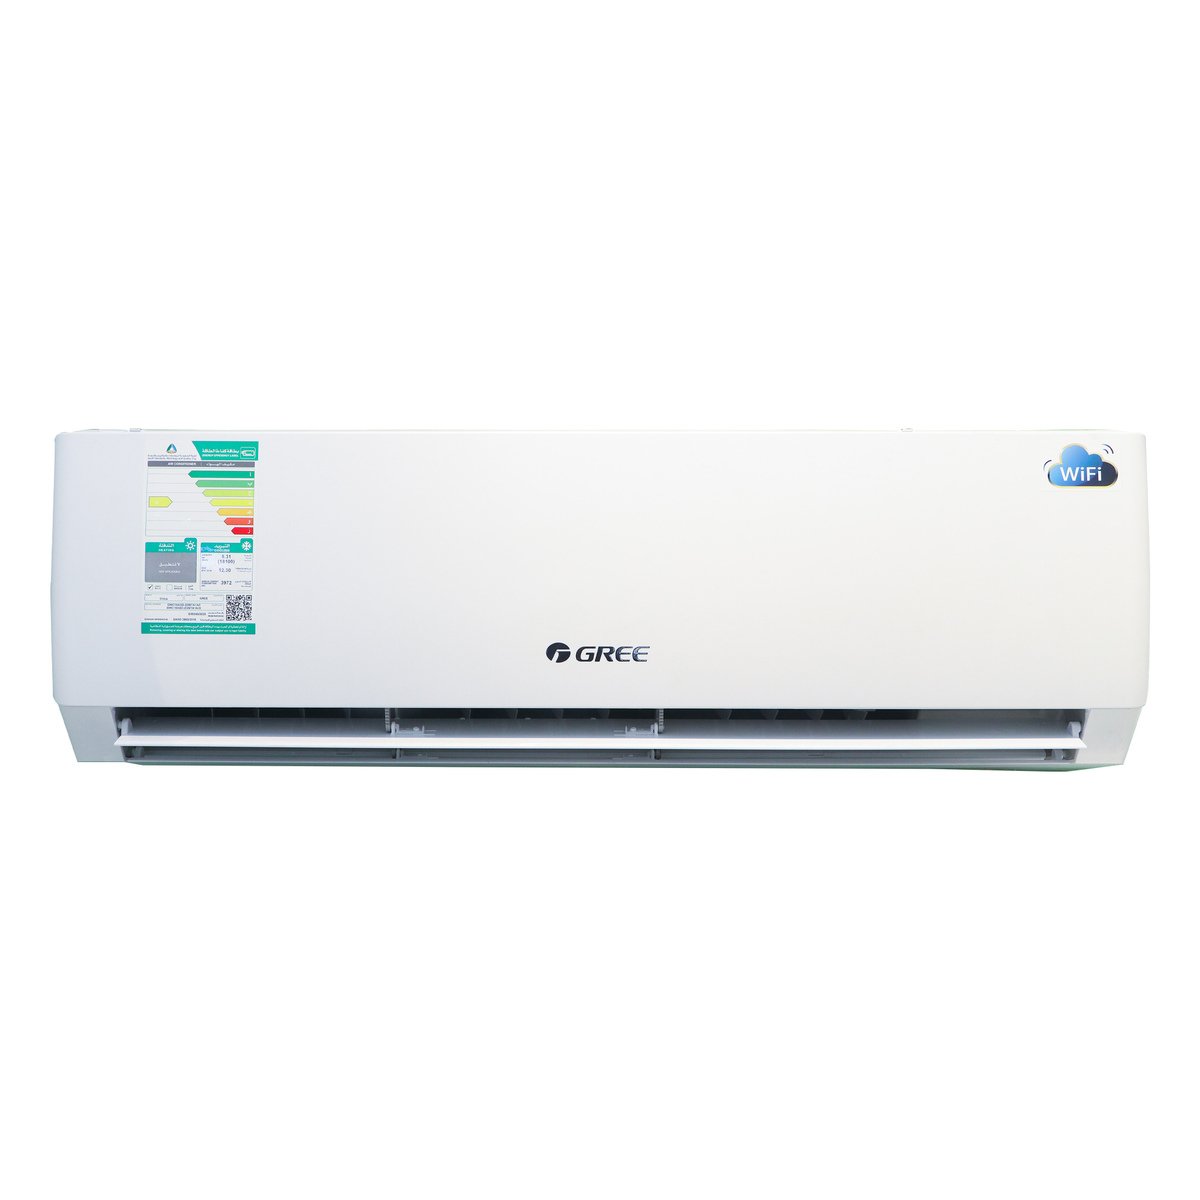 Gree Split Air Conditioner GWC18AGDD 1.5Ton Cool